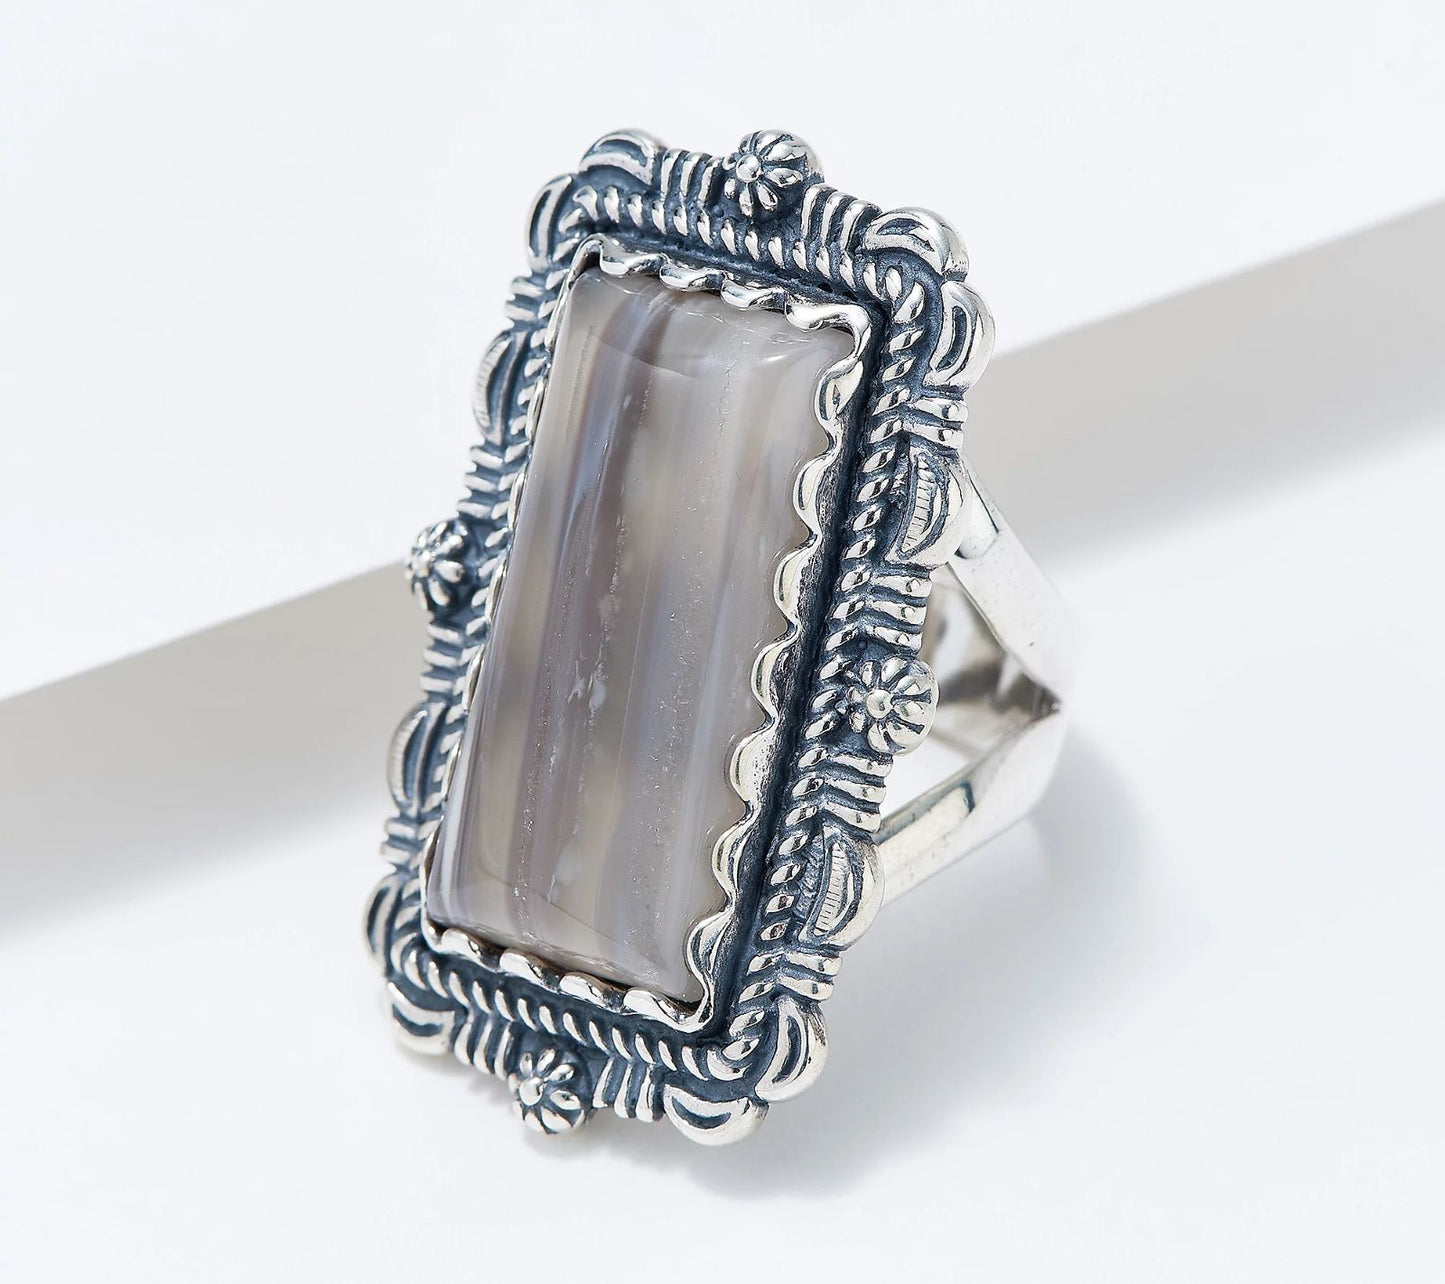 American West Rectangular Grey Agate Gemstone Ring Size 8 Sterling Silver